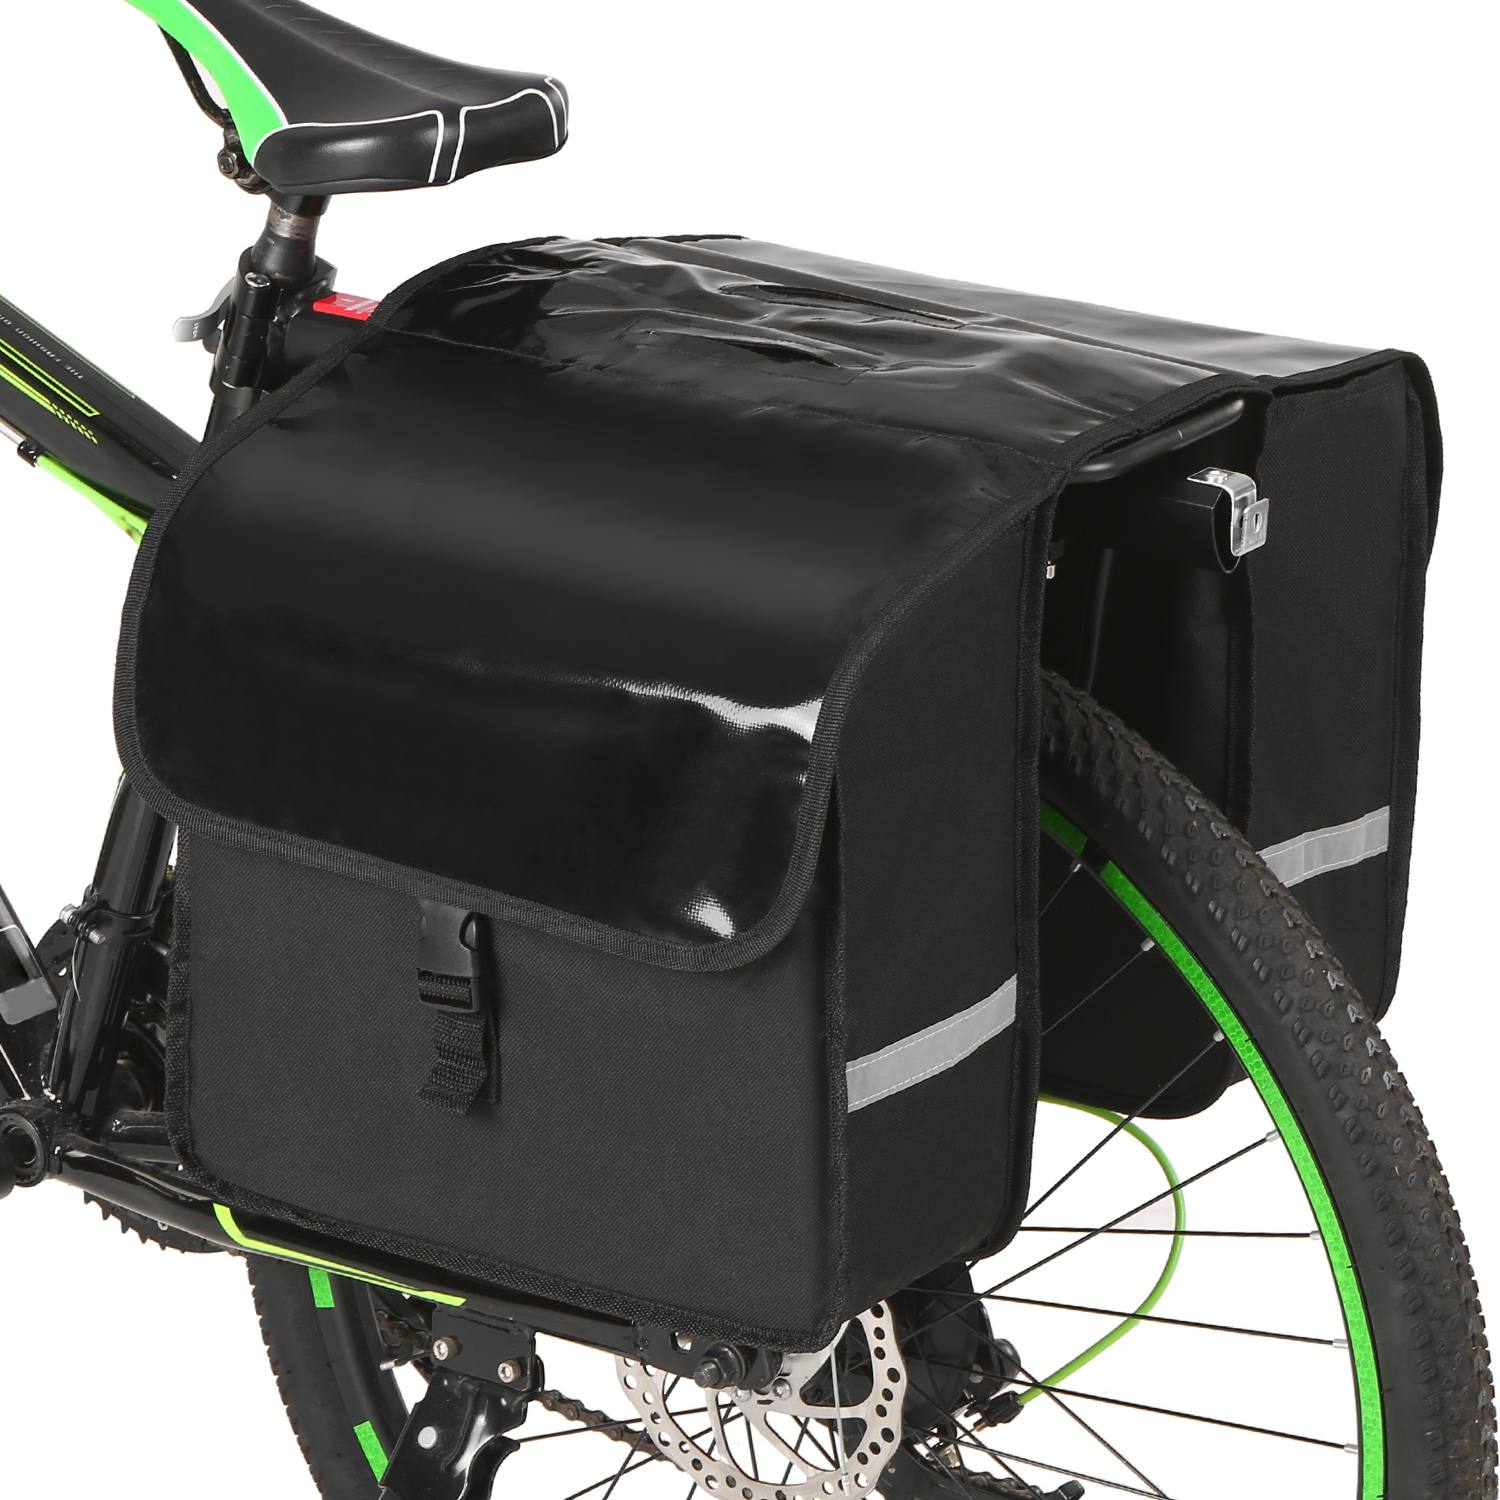 Waterproof Bicycle Trunk Bag,MTB Road Bike luggage Double Pannier at the back,cycling Rack Rear Seat Tail Carrier case MX200717 от DHgate WW